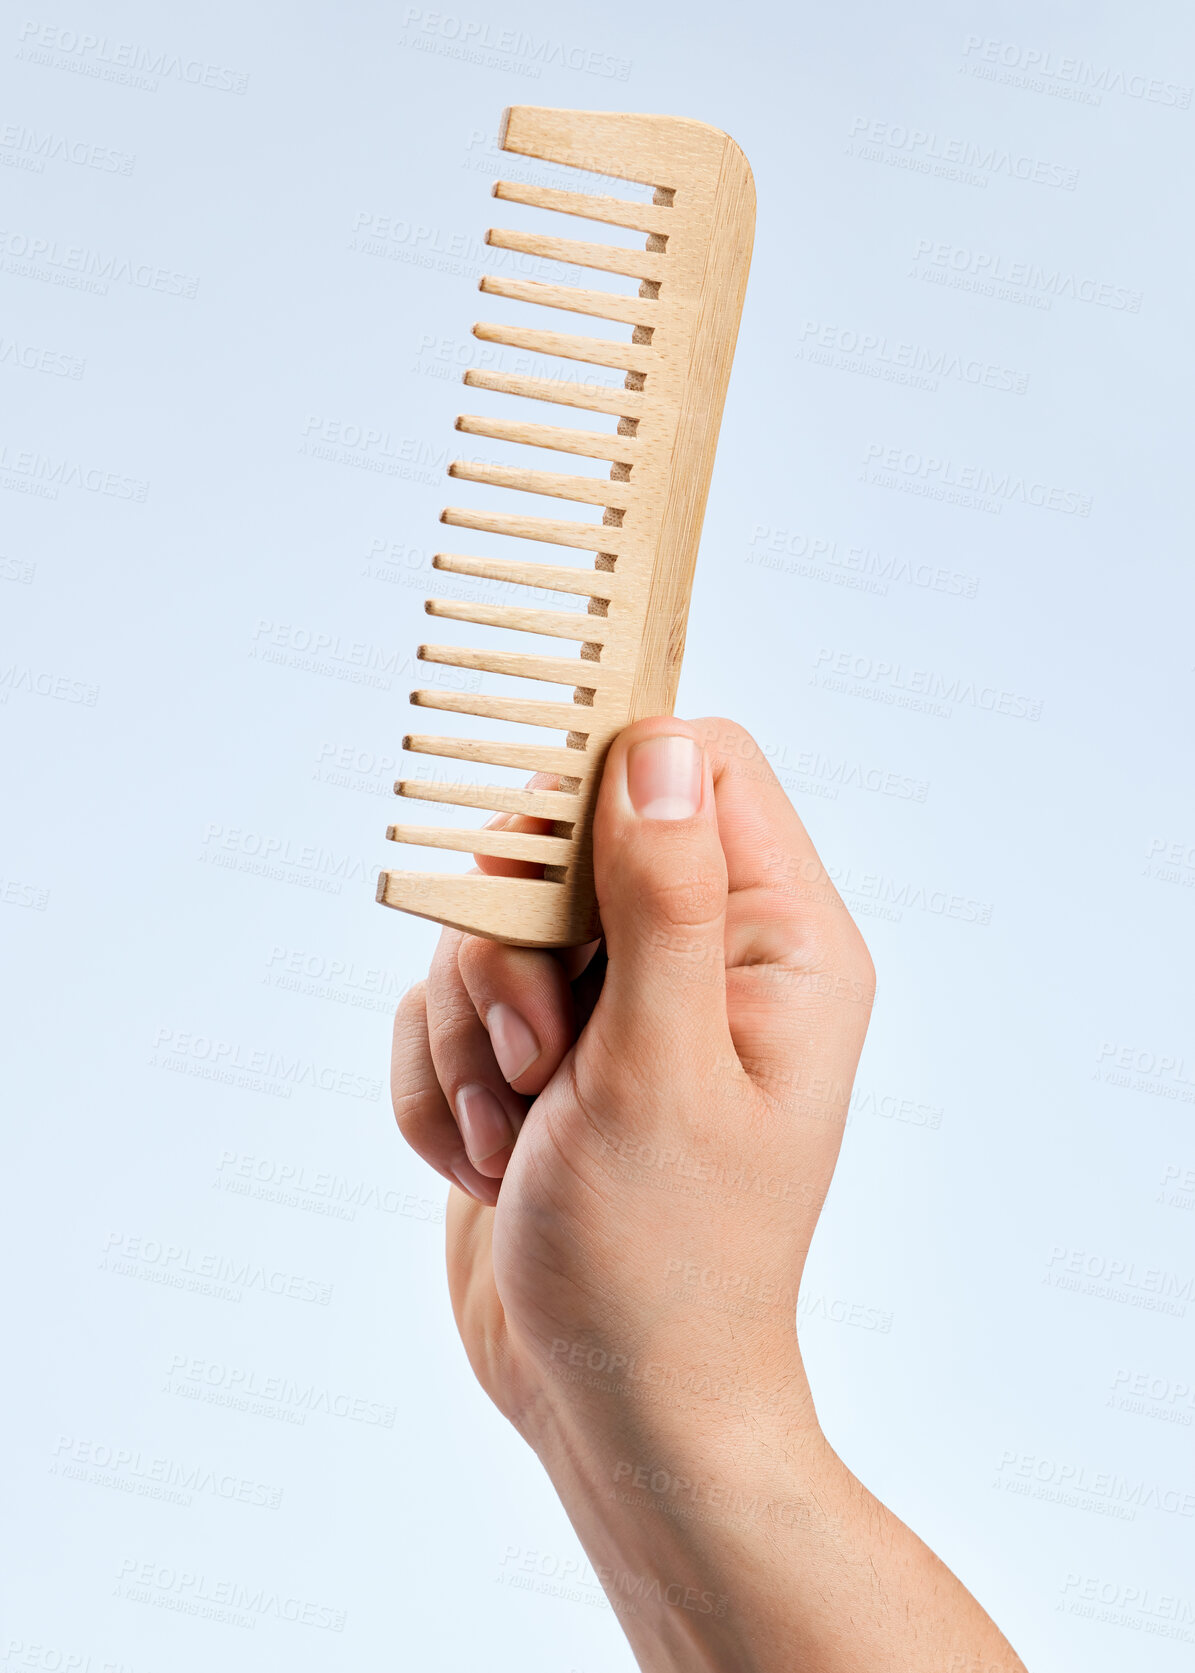 Buy stock photo Shot of an unrecognizable man holding a comb against a white background